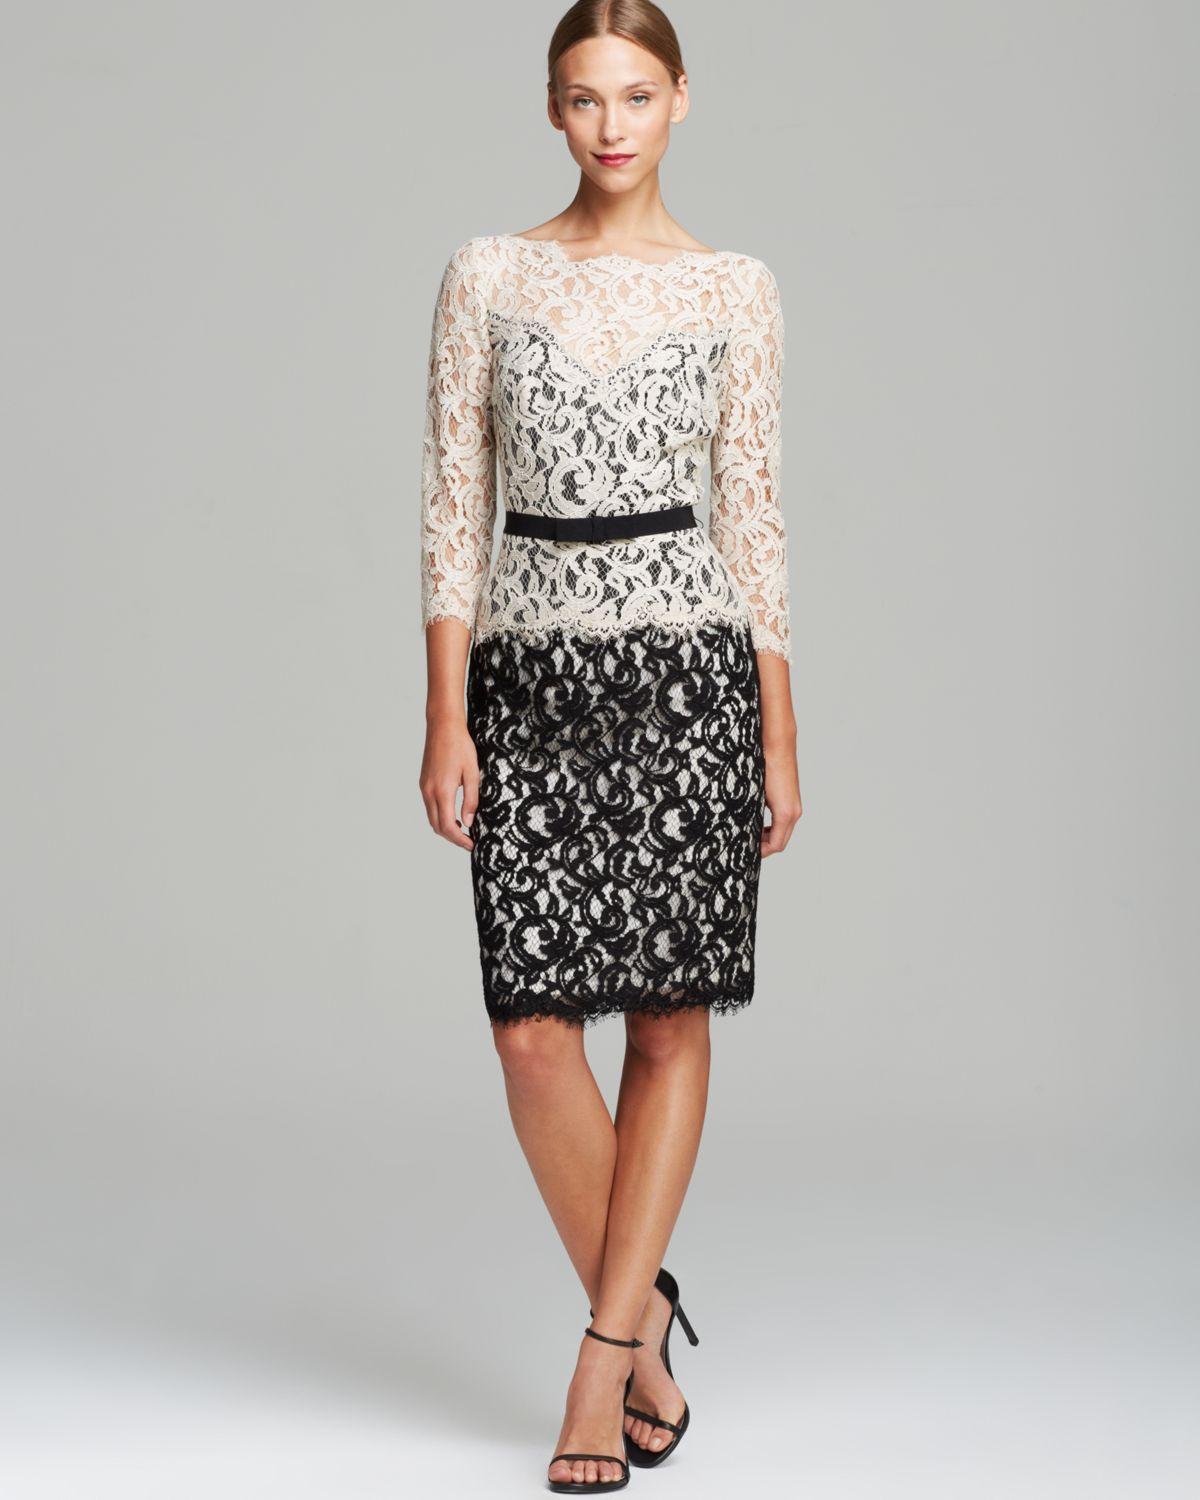 bloomingdales cocktail dresses for wedding shirts